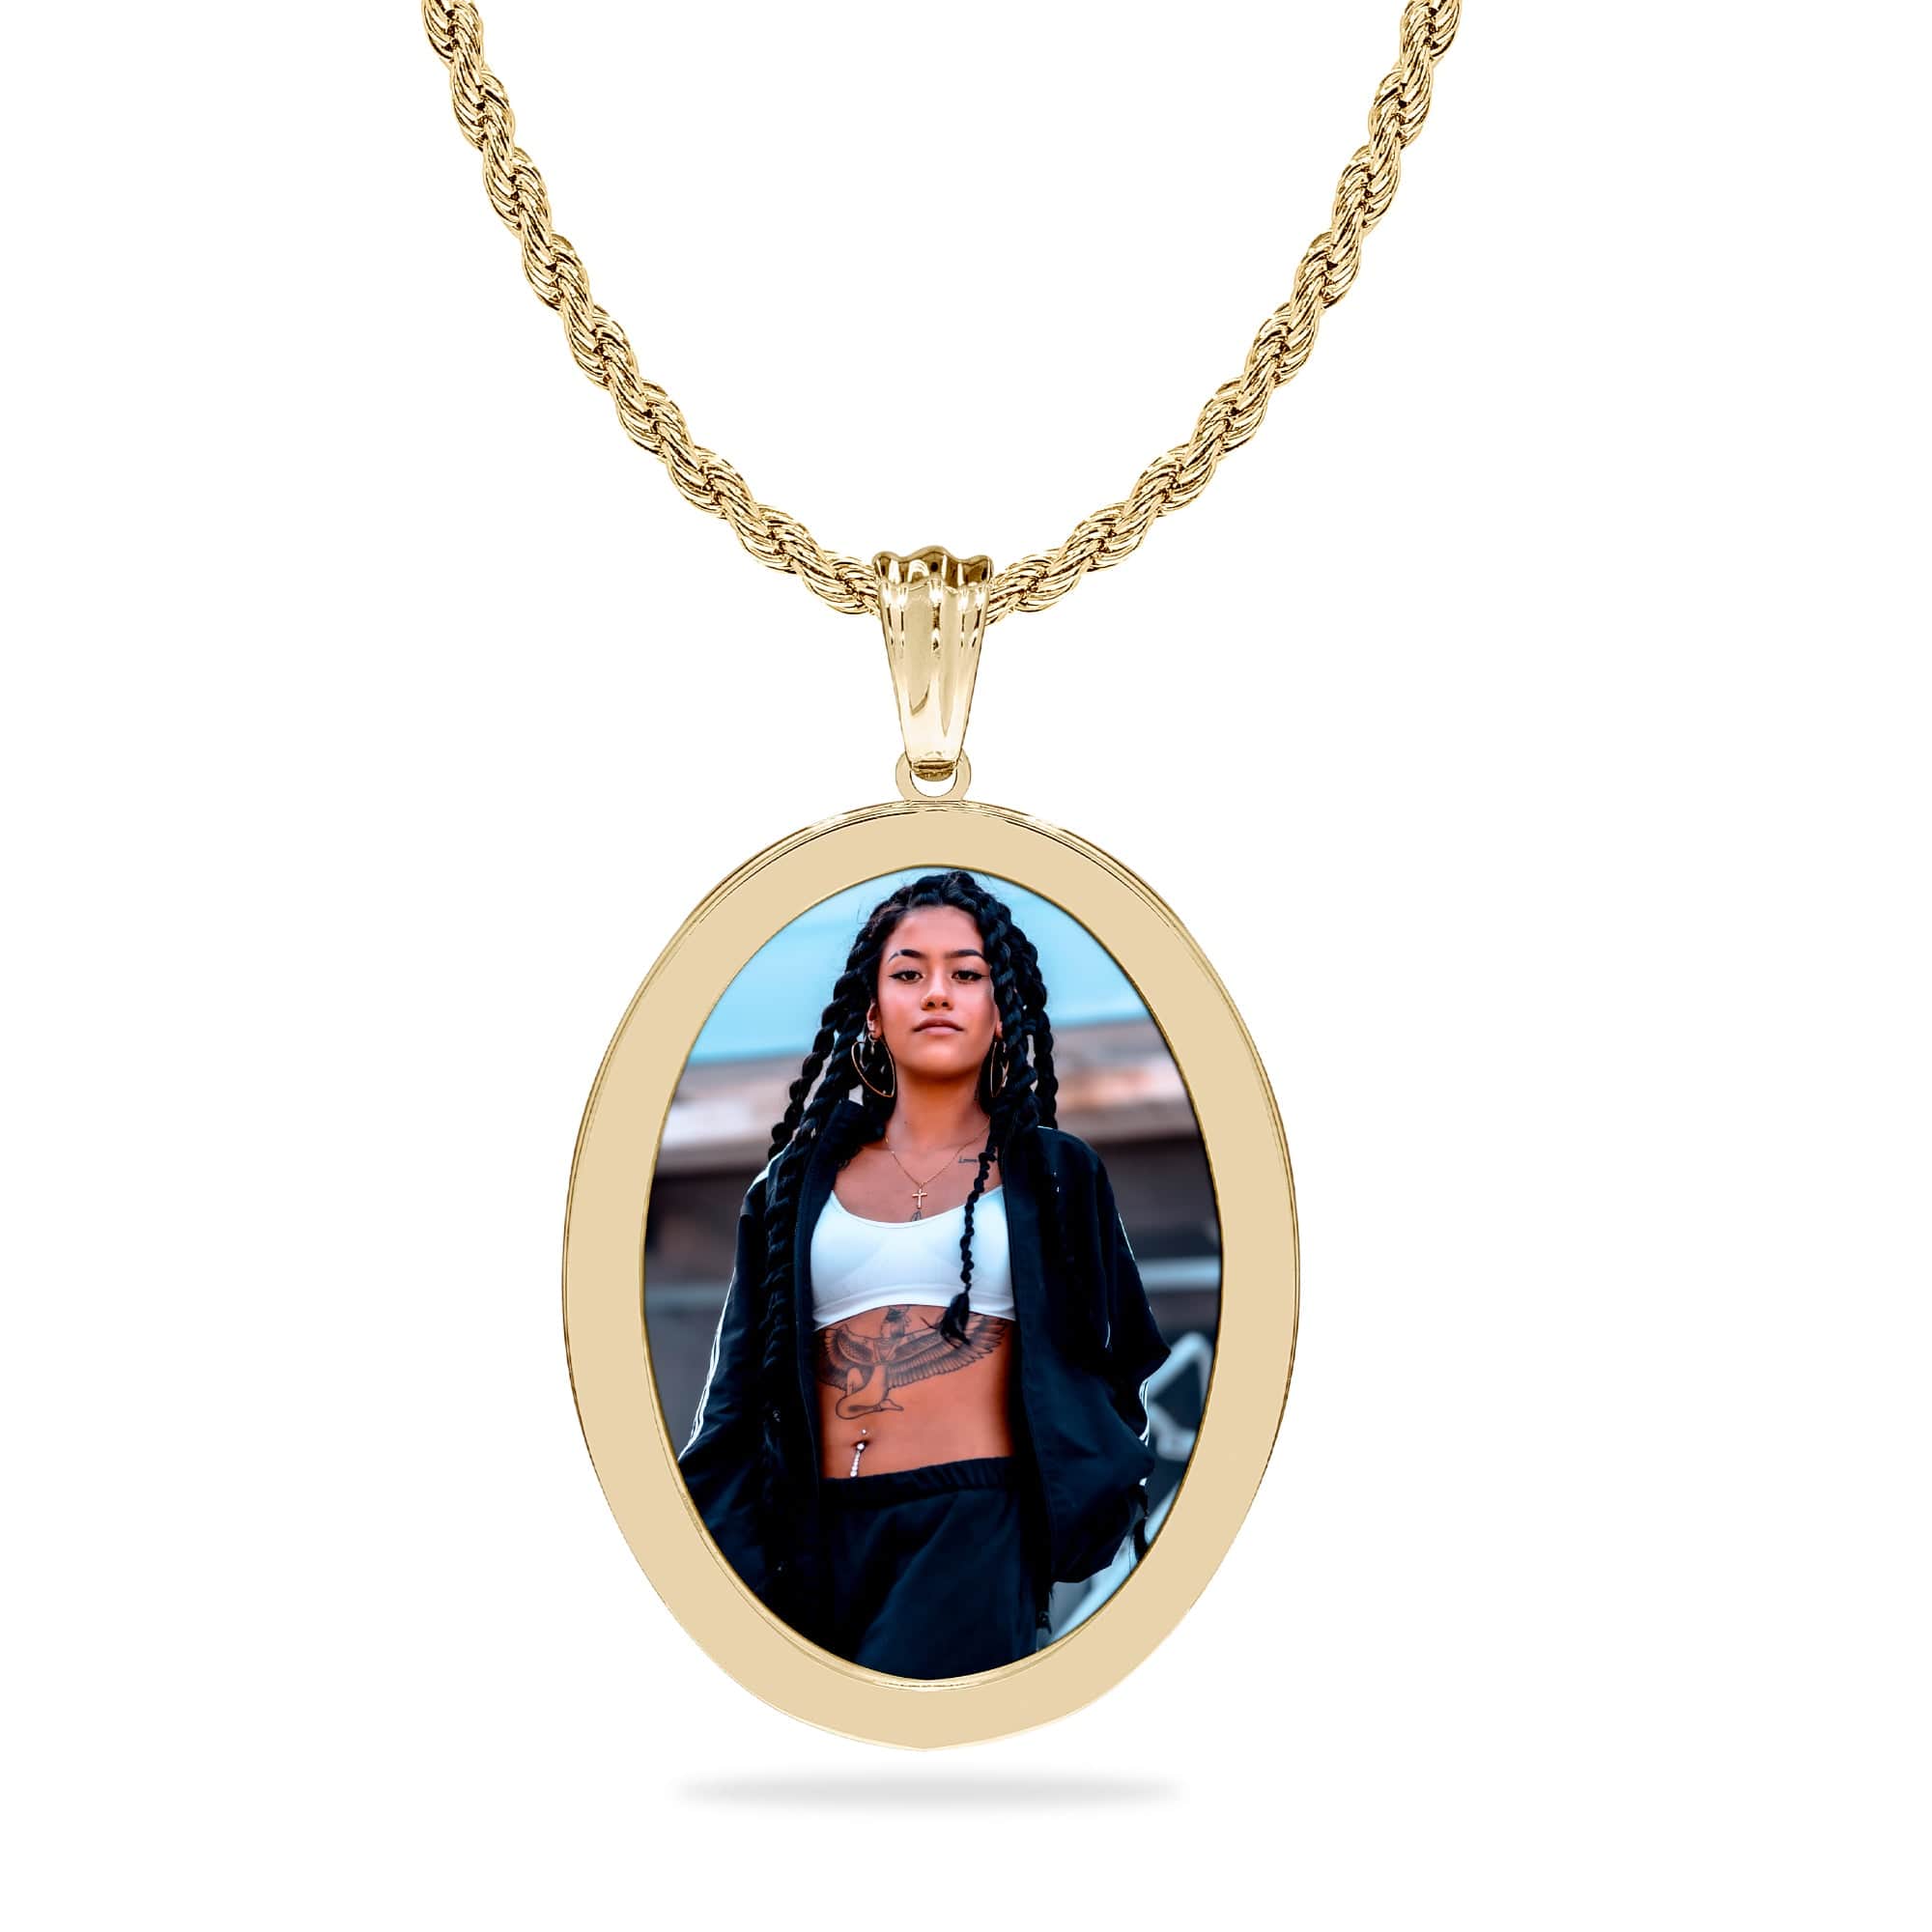 Gold Tone Stainless Steel / Rope Chain High Polished Oval Photo Pendant